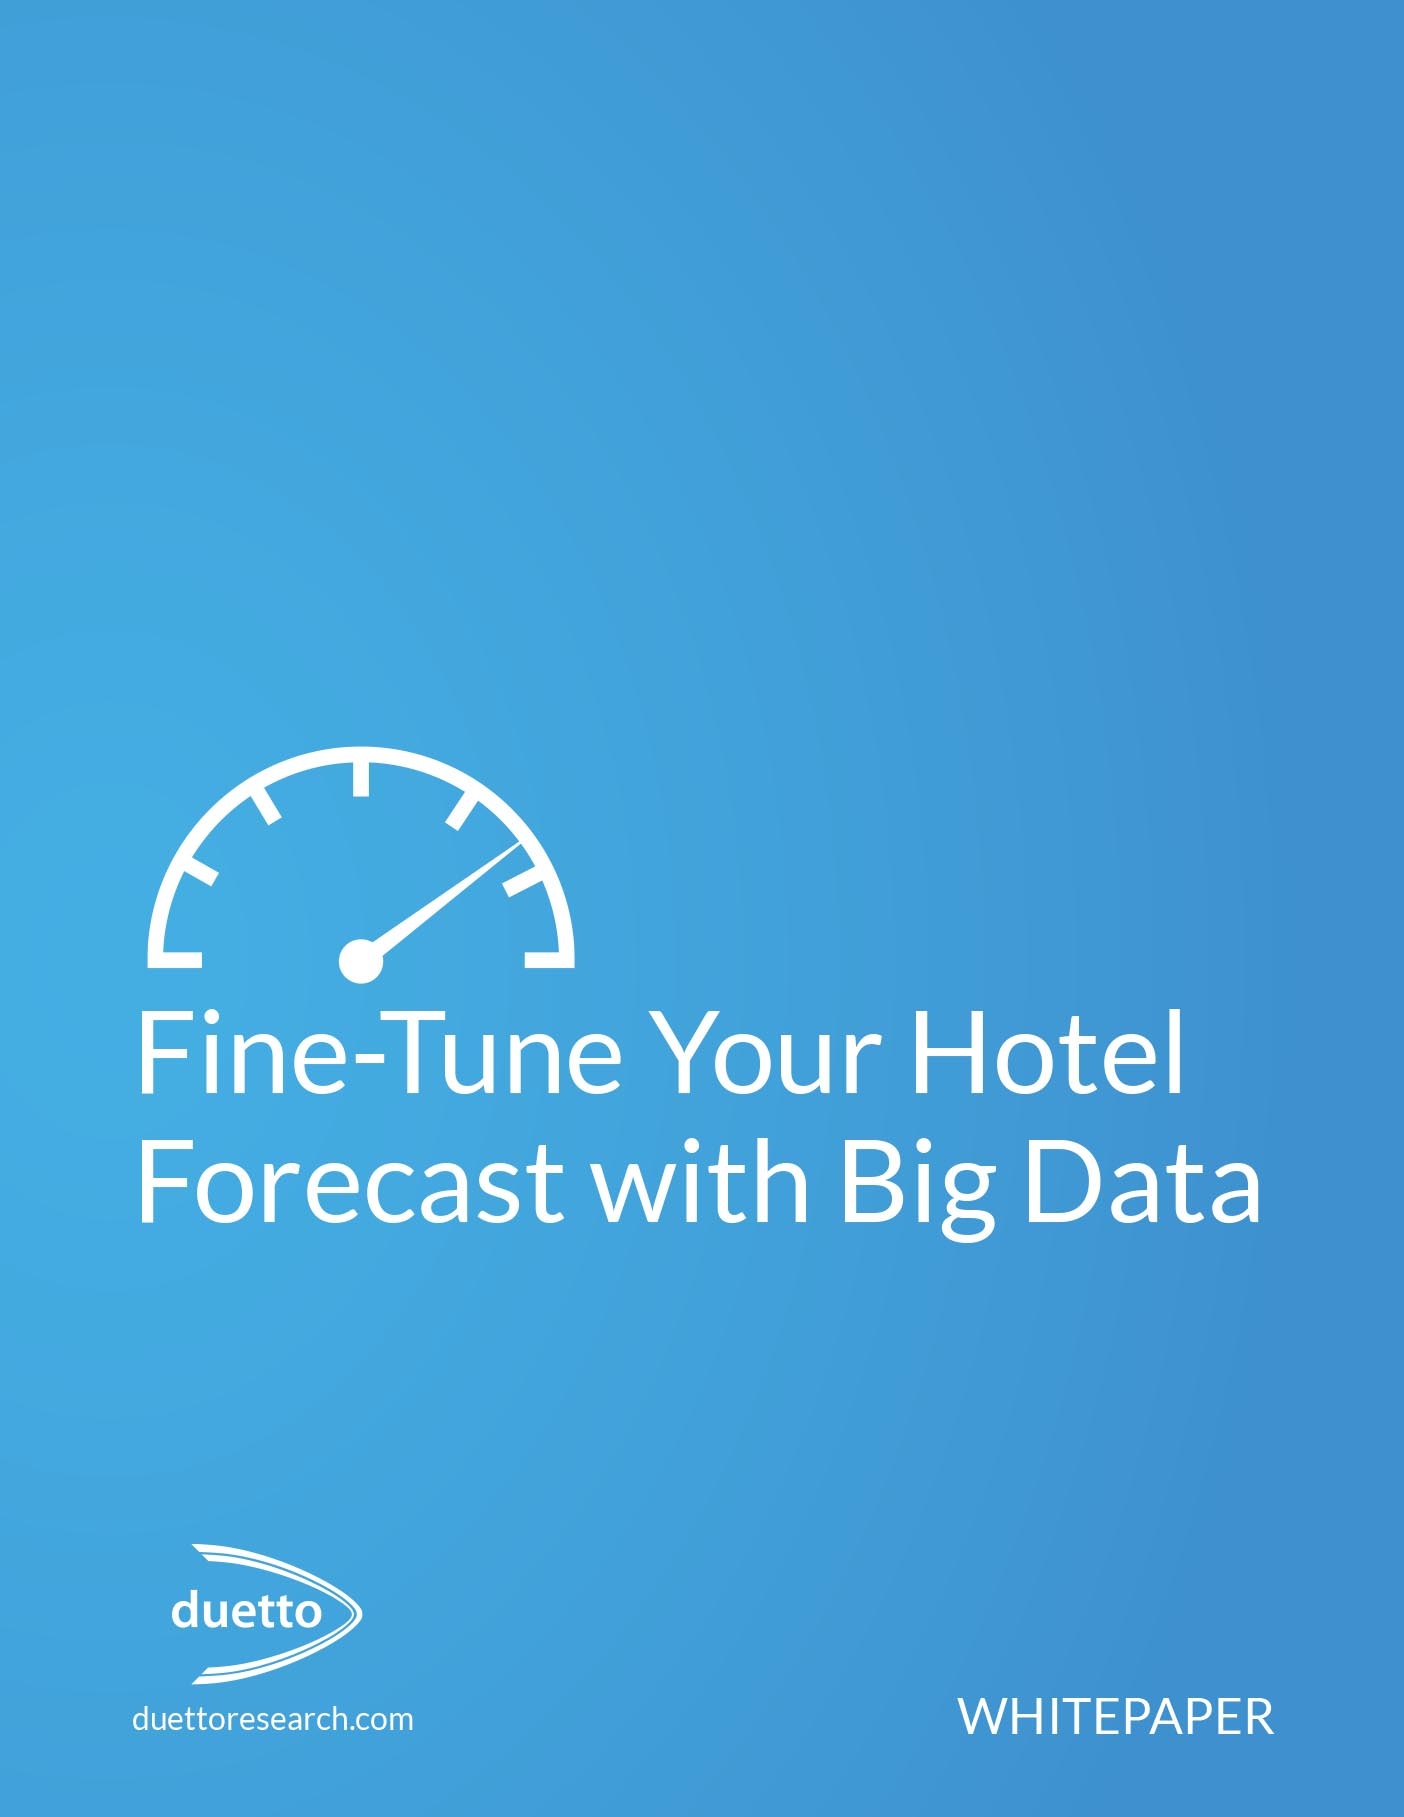 1 Fine-Tune-your-Hotel-Forecast-with-Big-Data-1.jpg